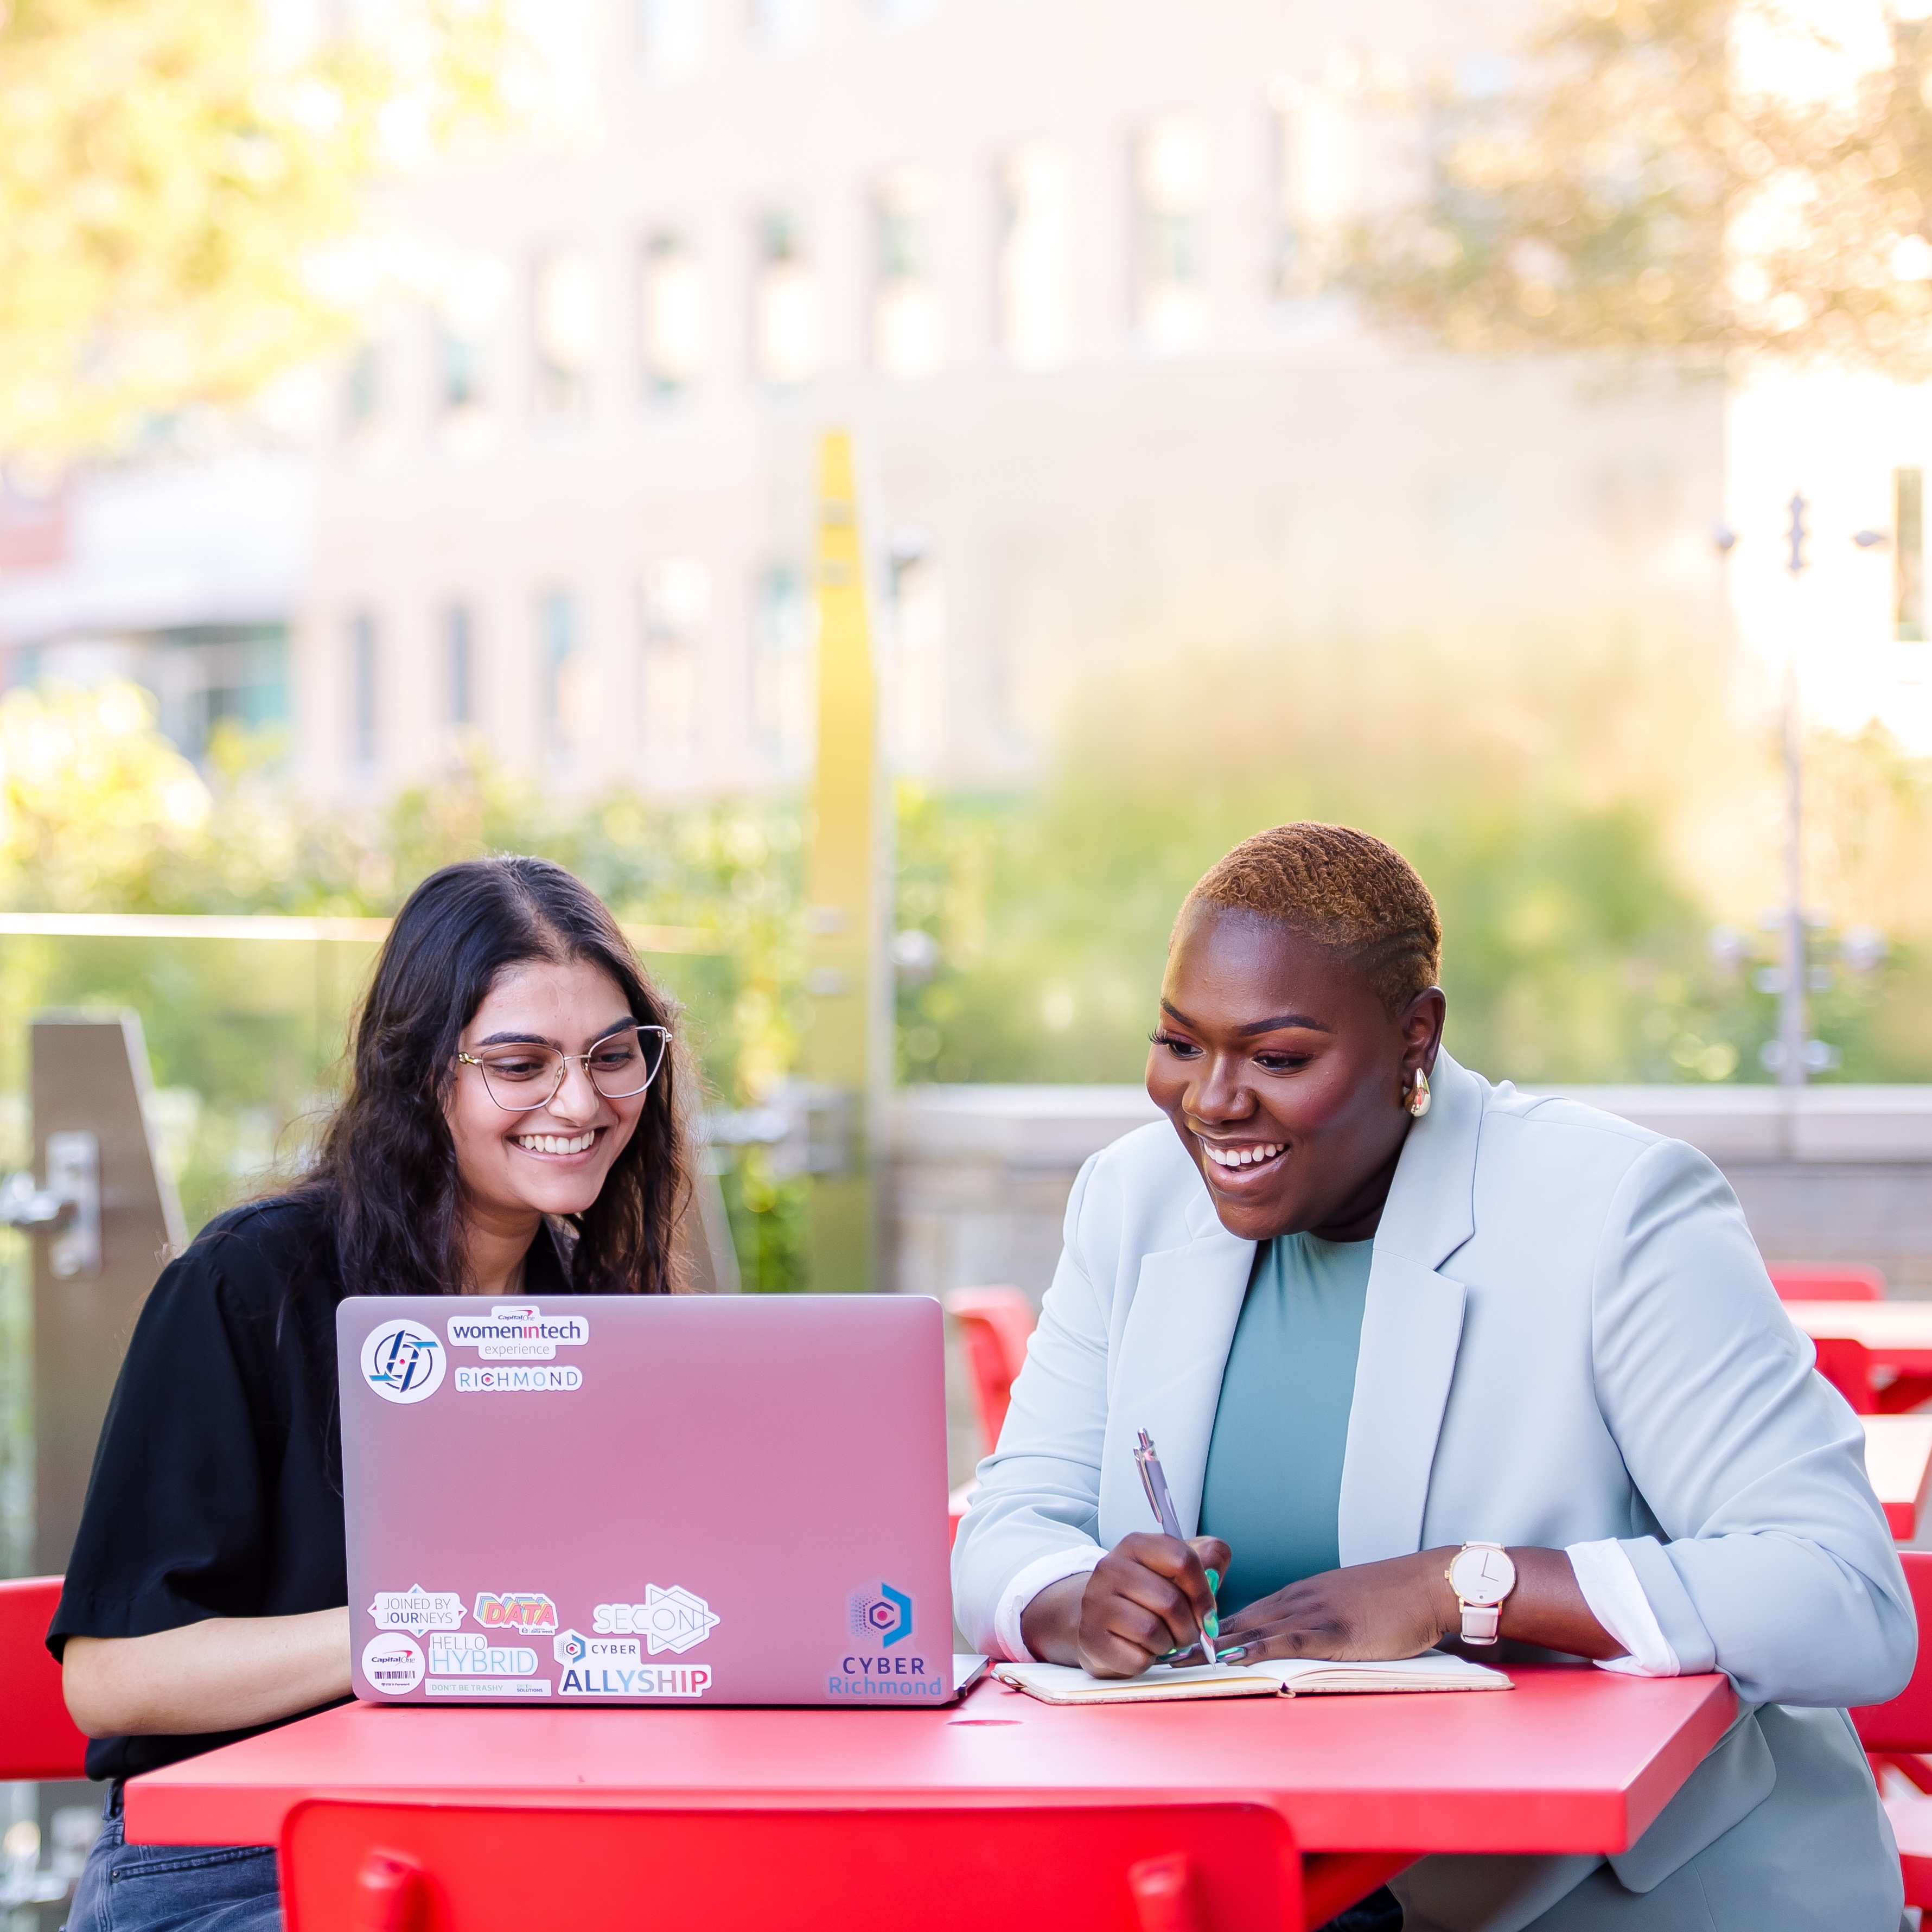 Two Capital One associates sit outside at a red table and look at a laptop together